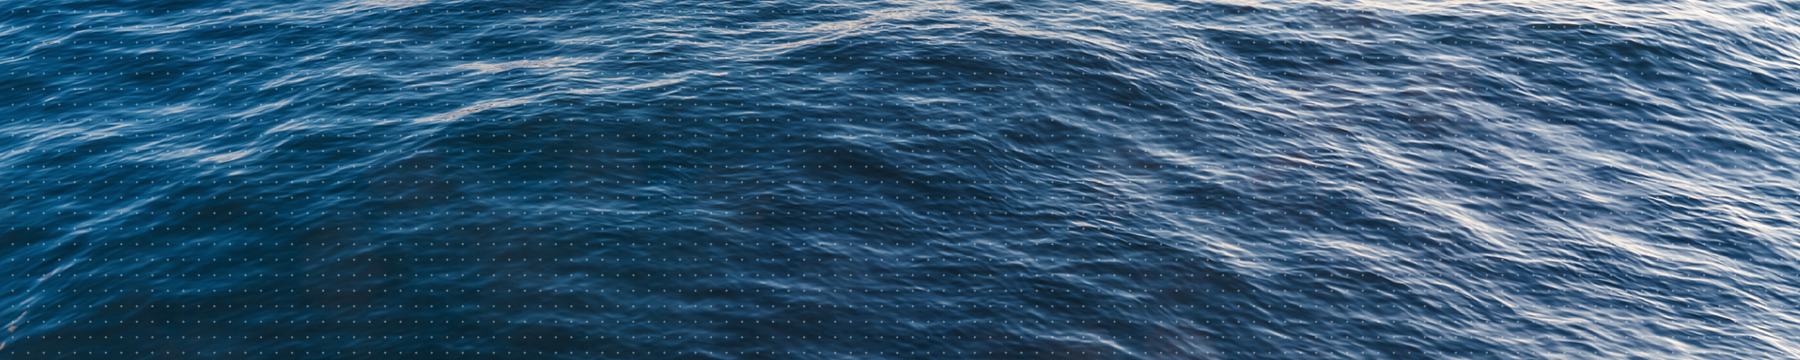 Photograph of water in the ocean